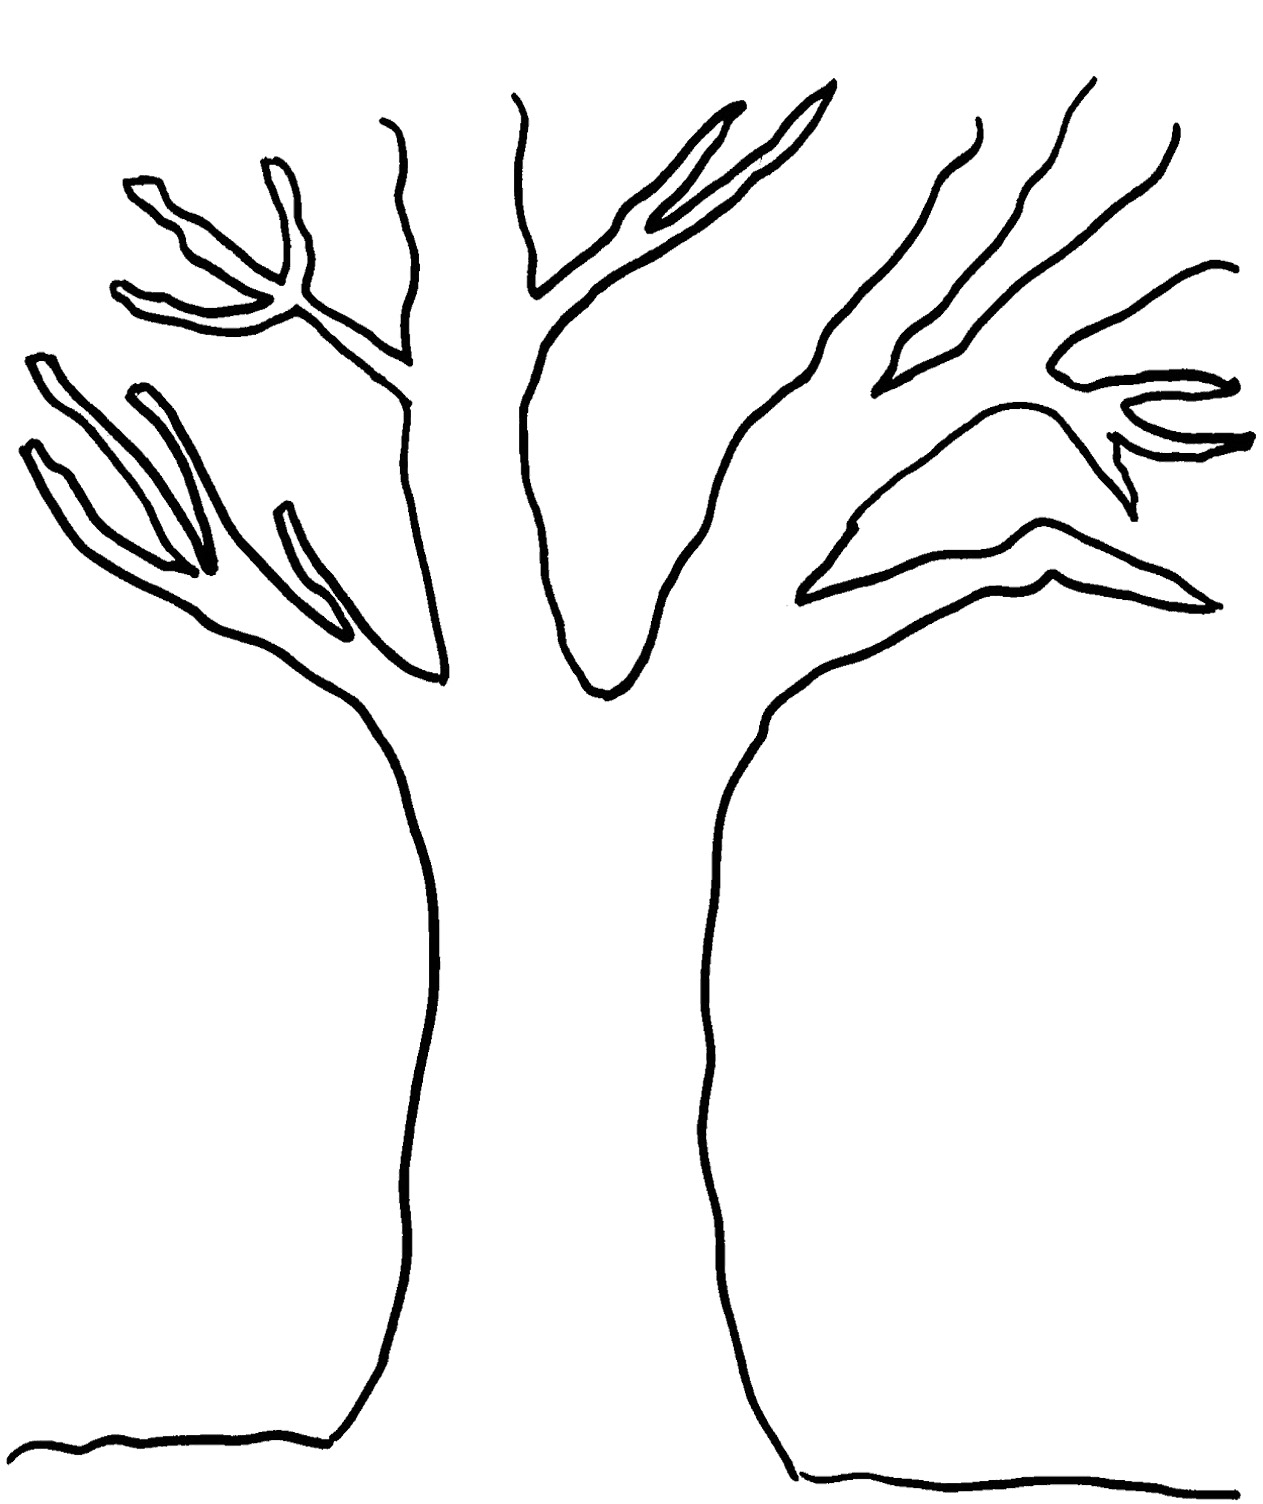 Tree Without Leaves Template - Clipart library